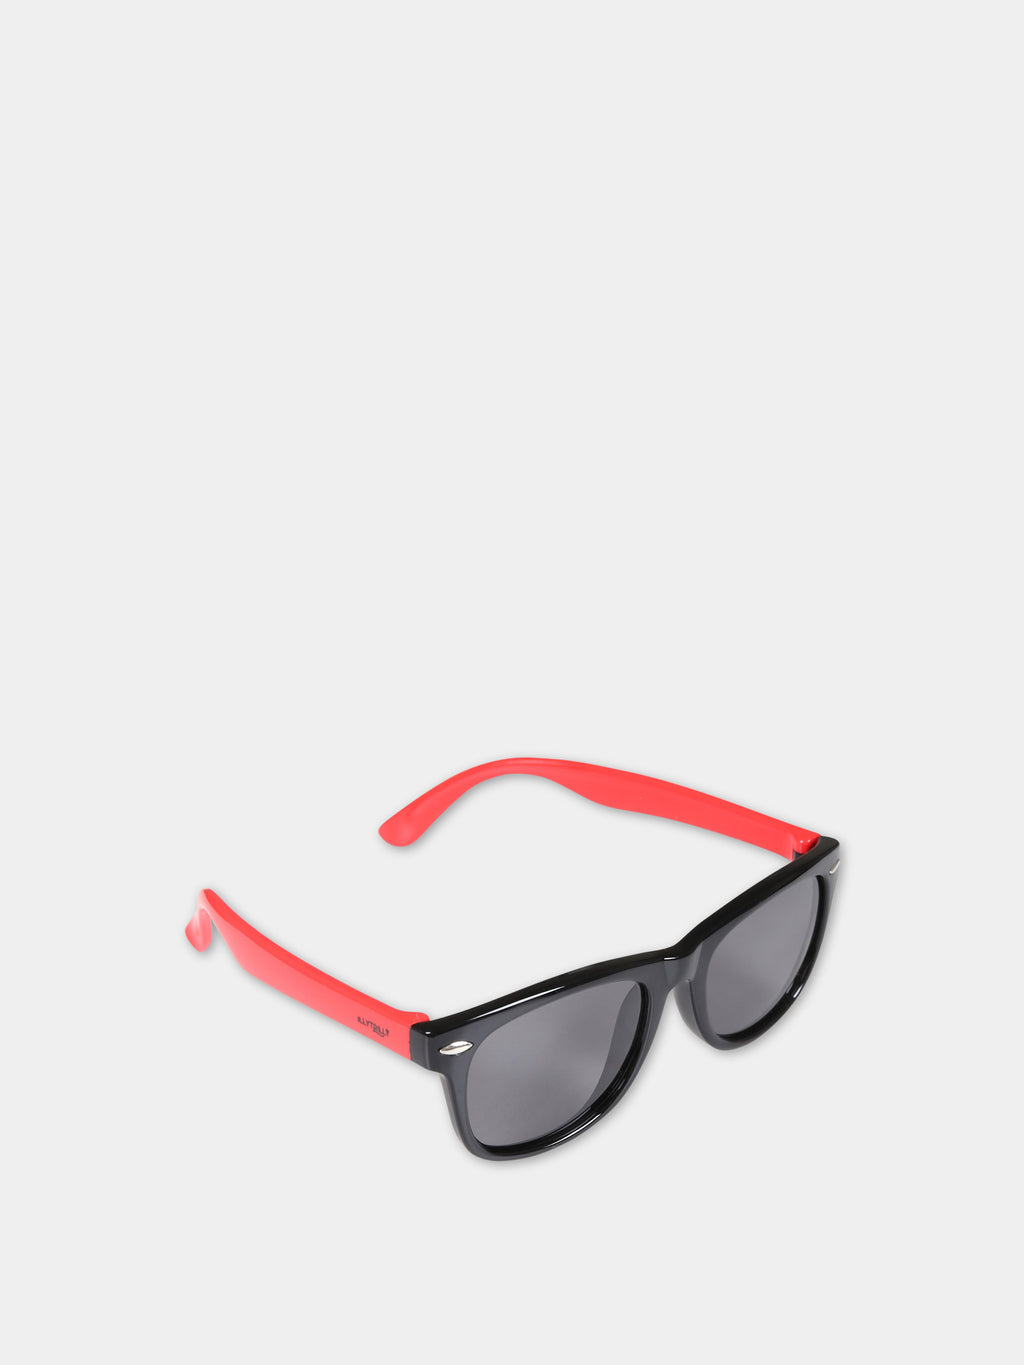 Red sunglasses for kids